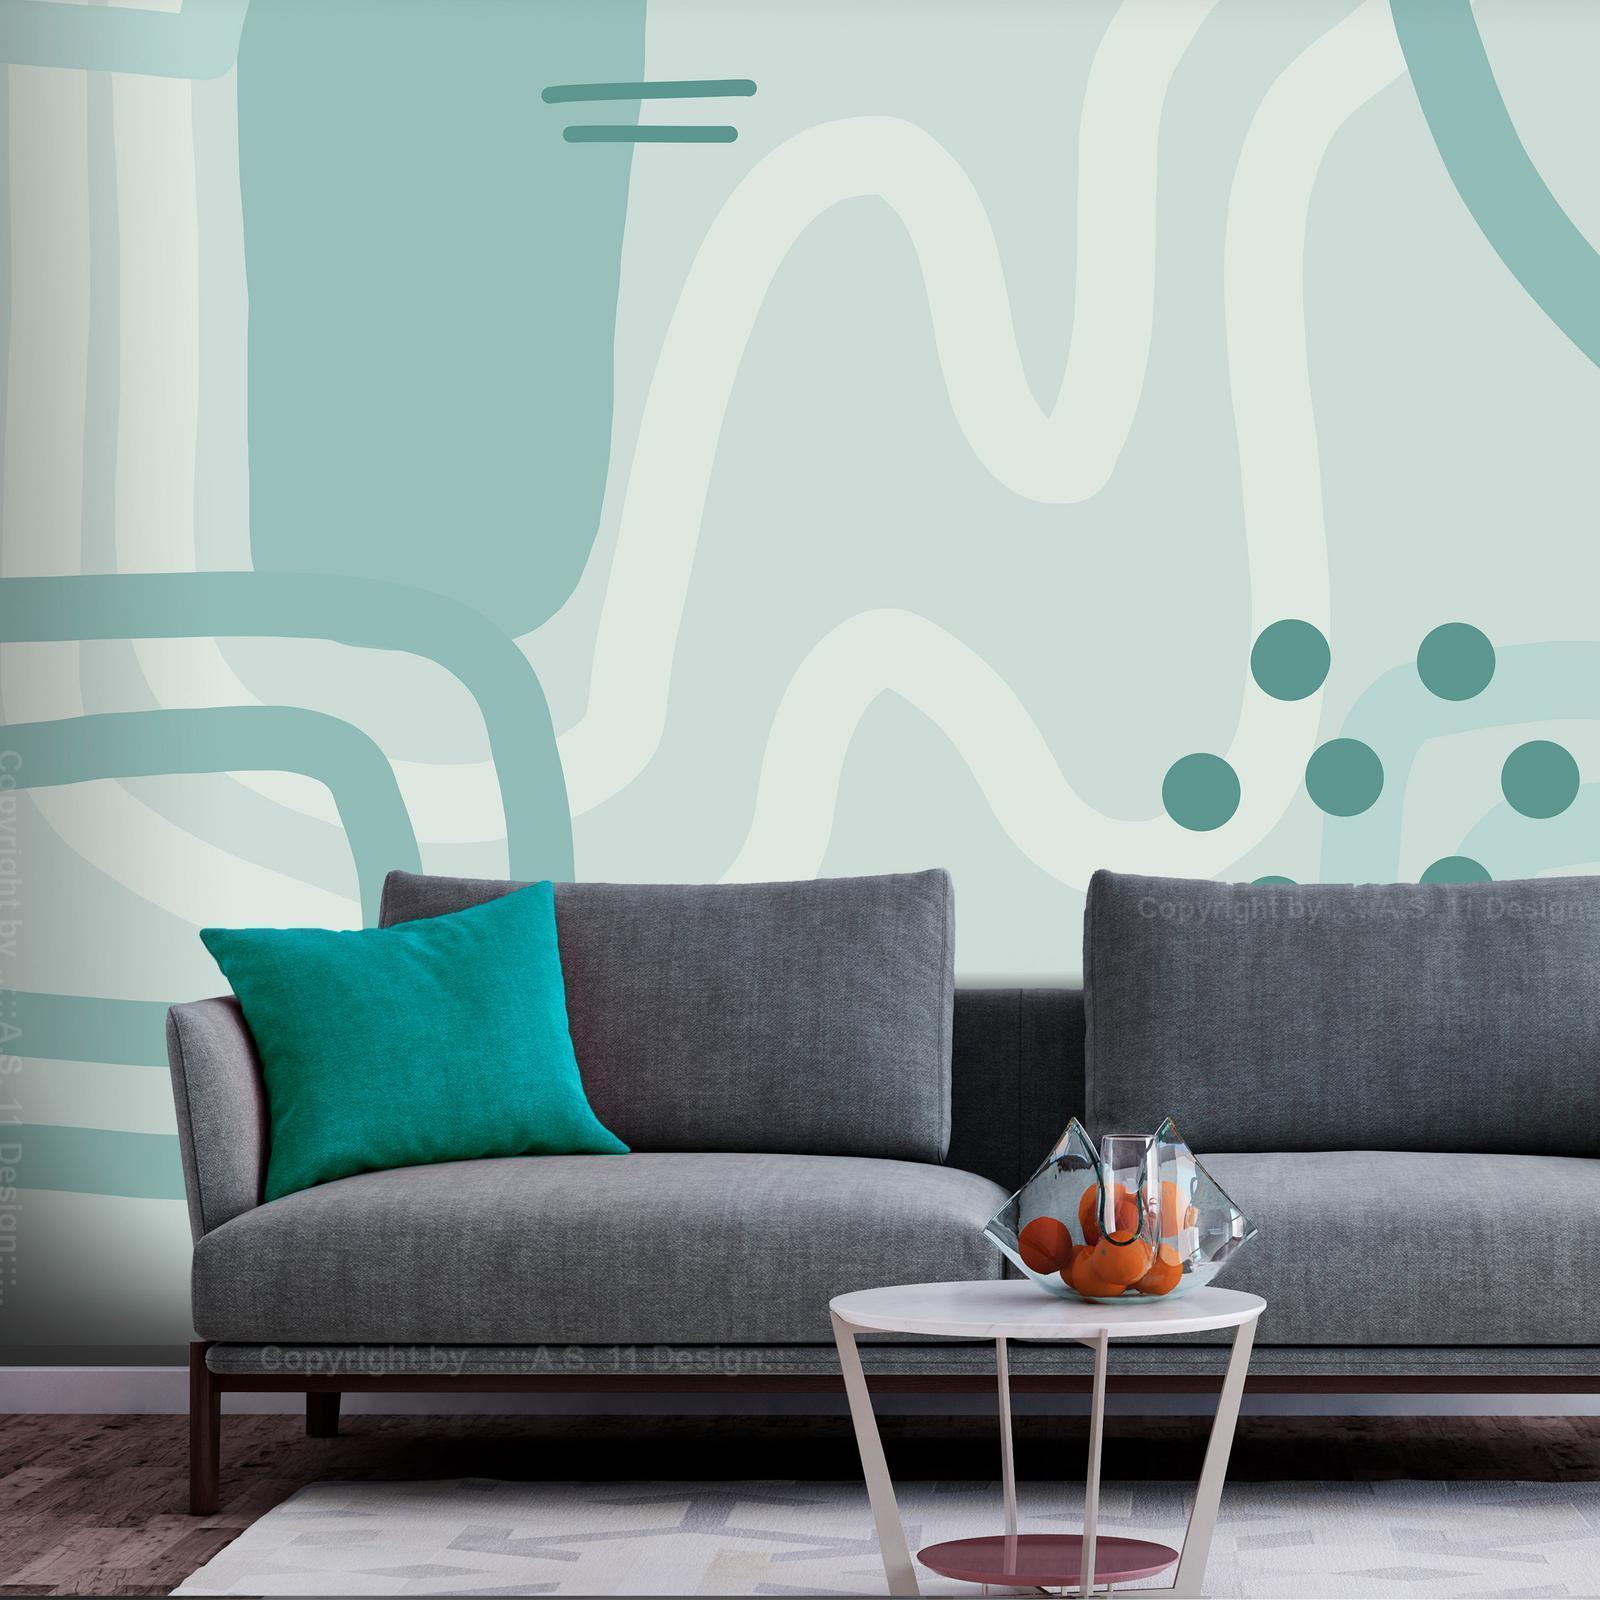 Papier peint - Geometric forms and patterns - abstract background with turquoise patterns